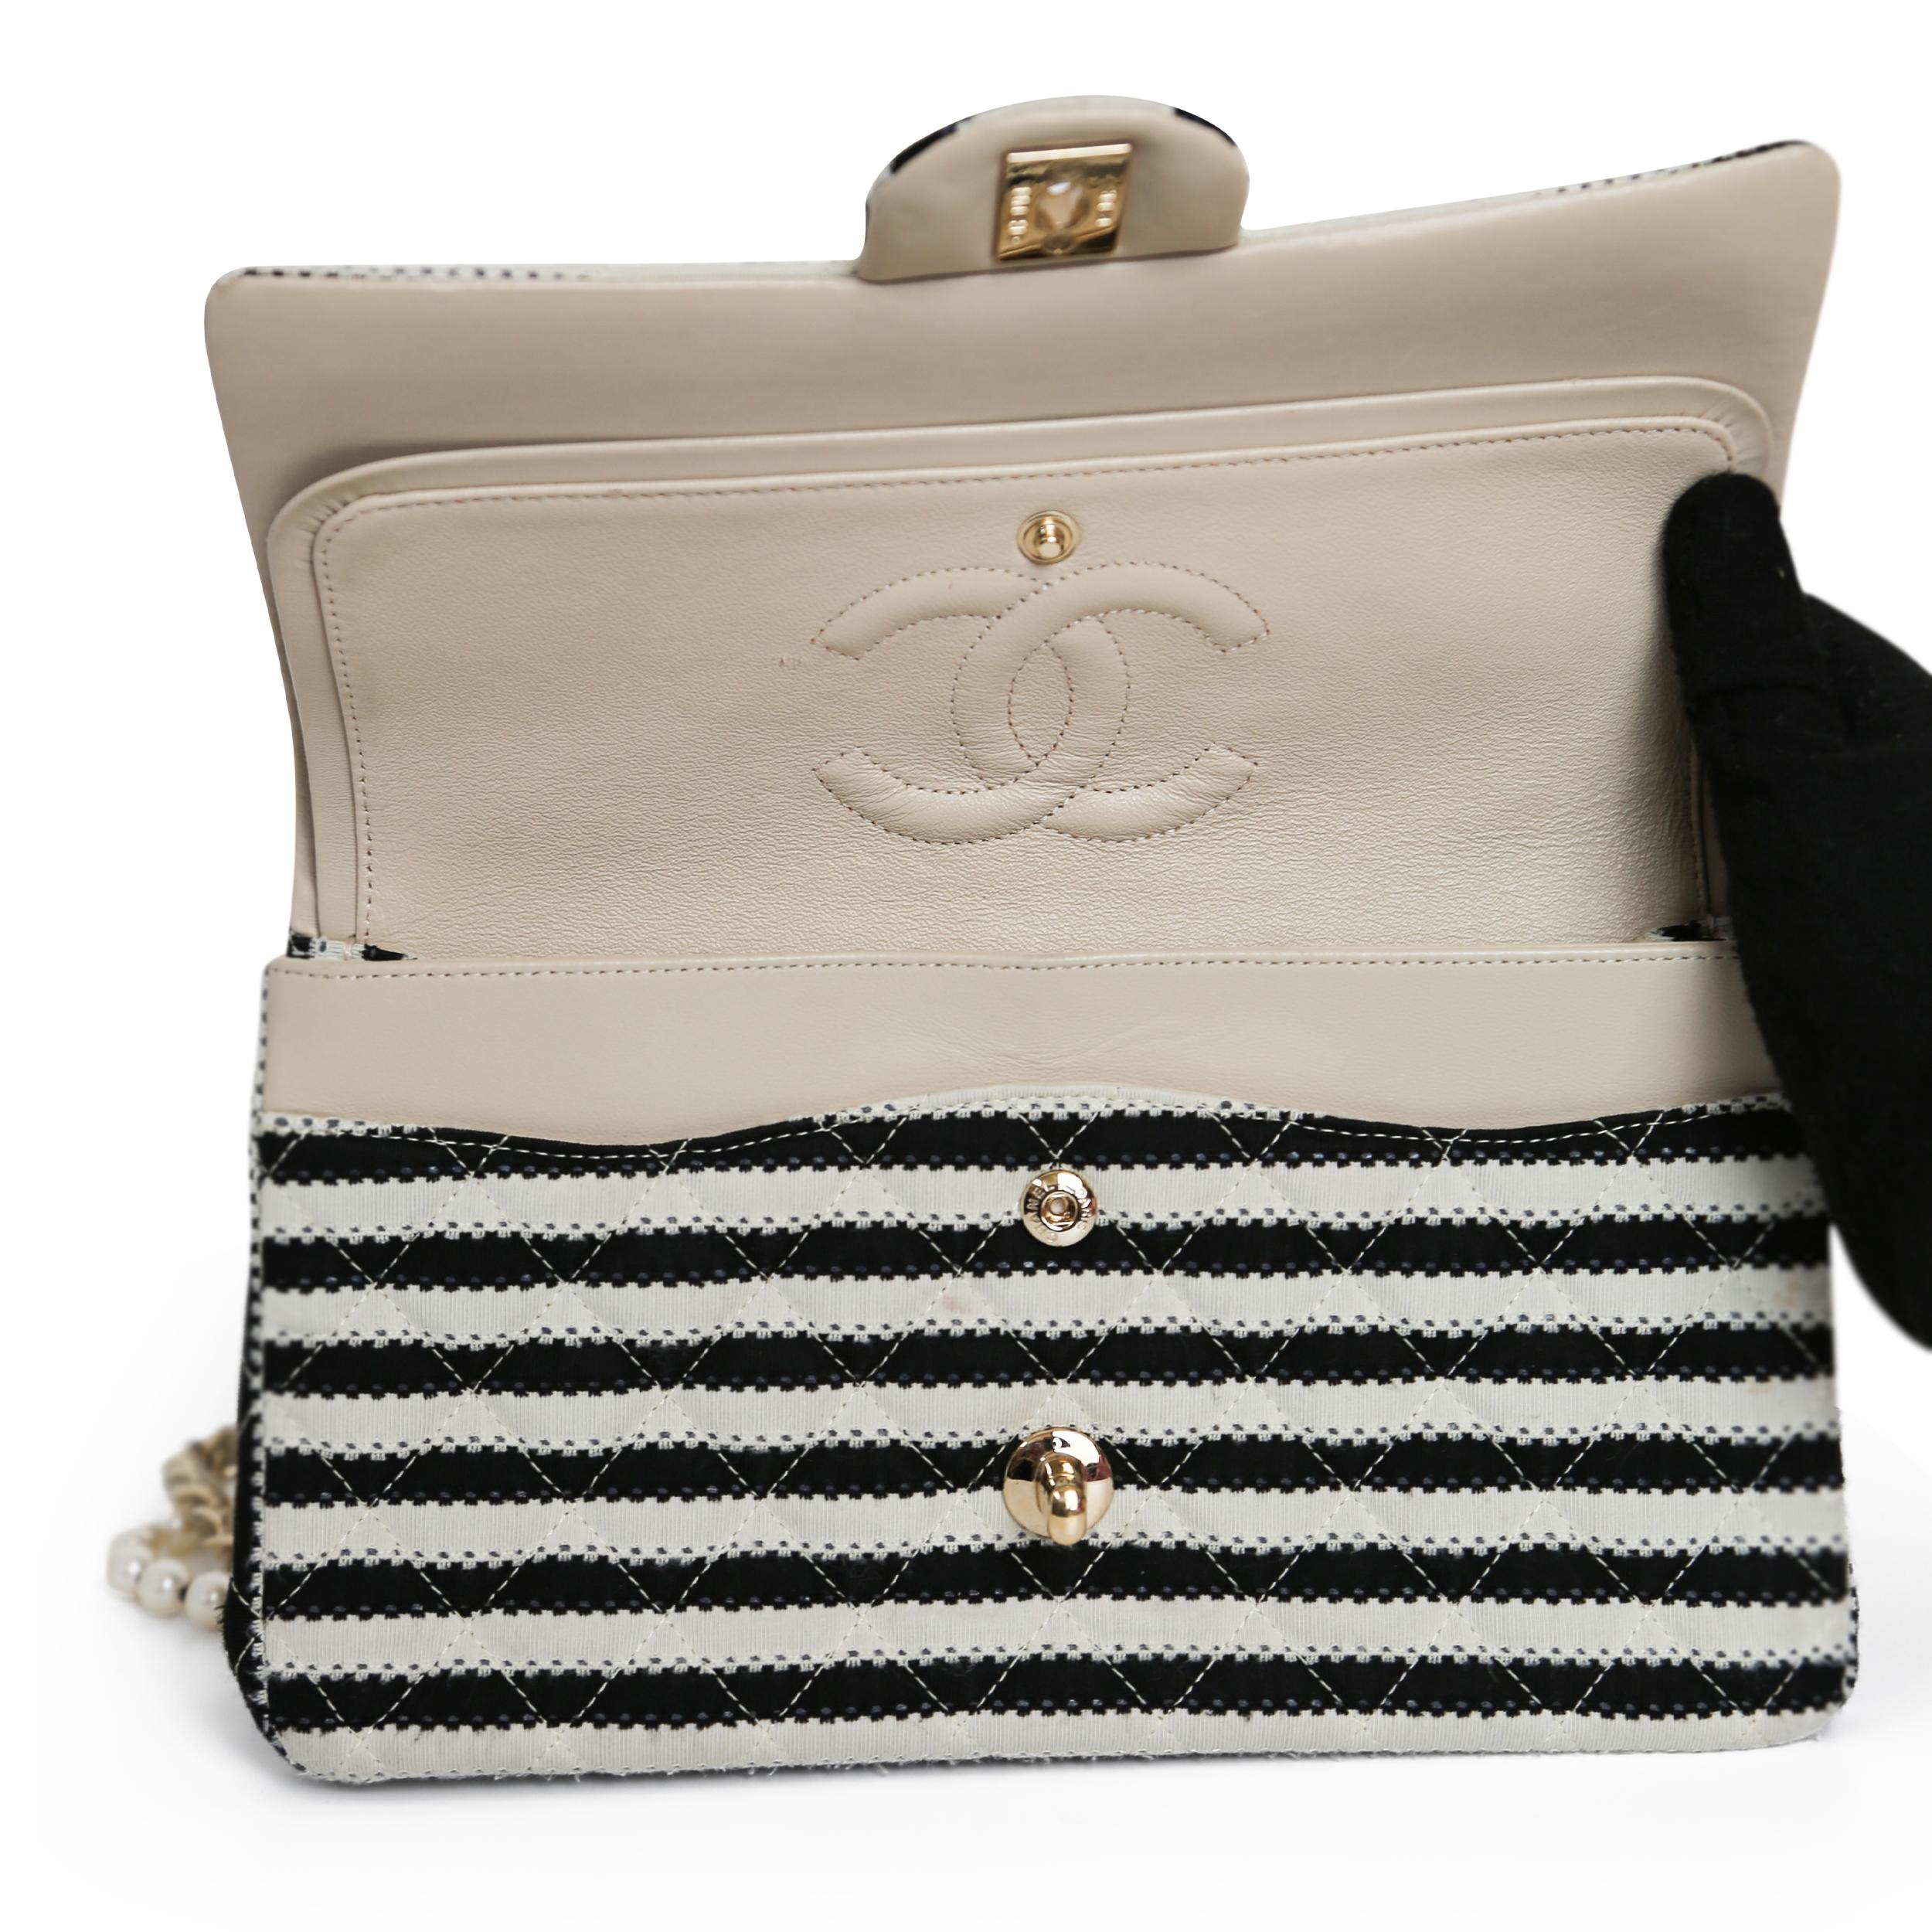 Chanel Coco Sailor Black and Cream Medium Double Flap Bag 2014 For Sale 4